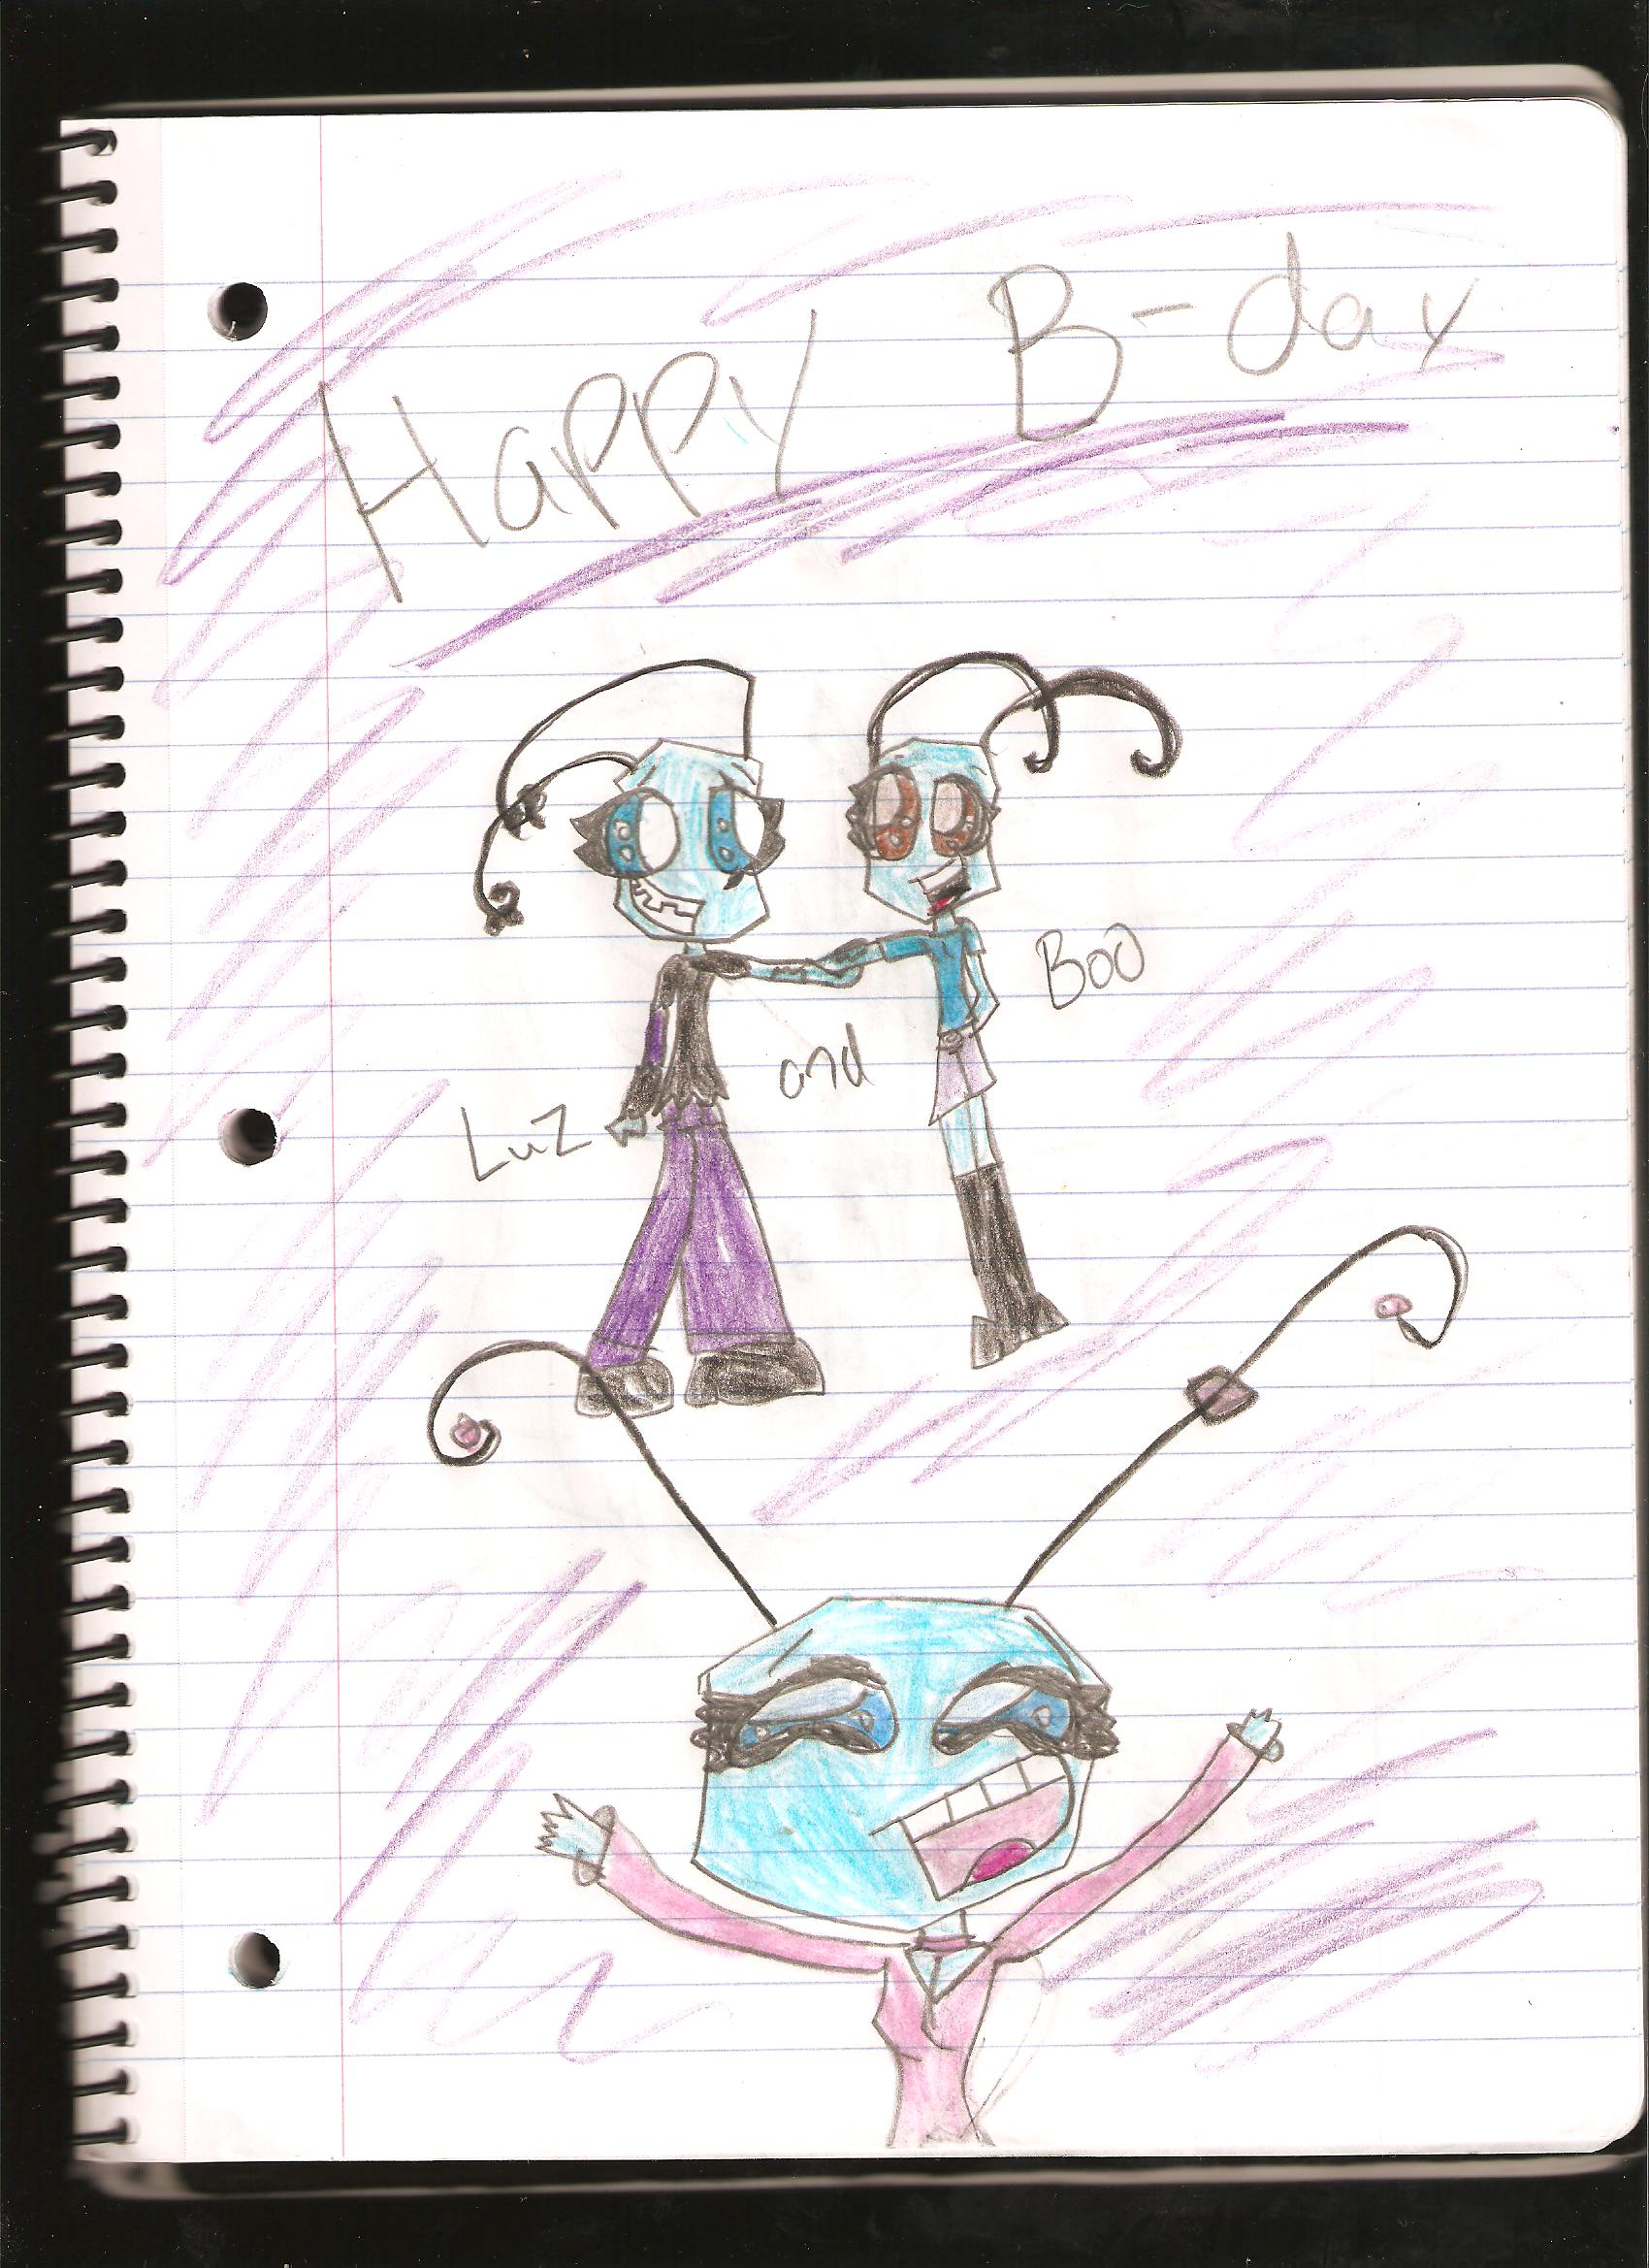 happy b day luz and boo by SkyGirl